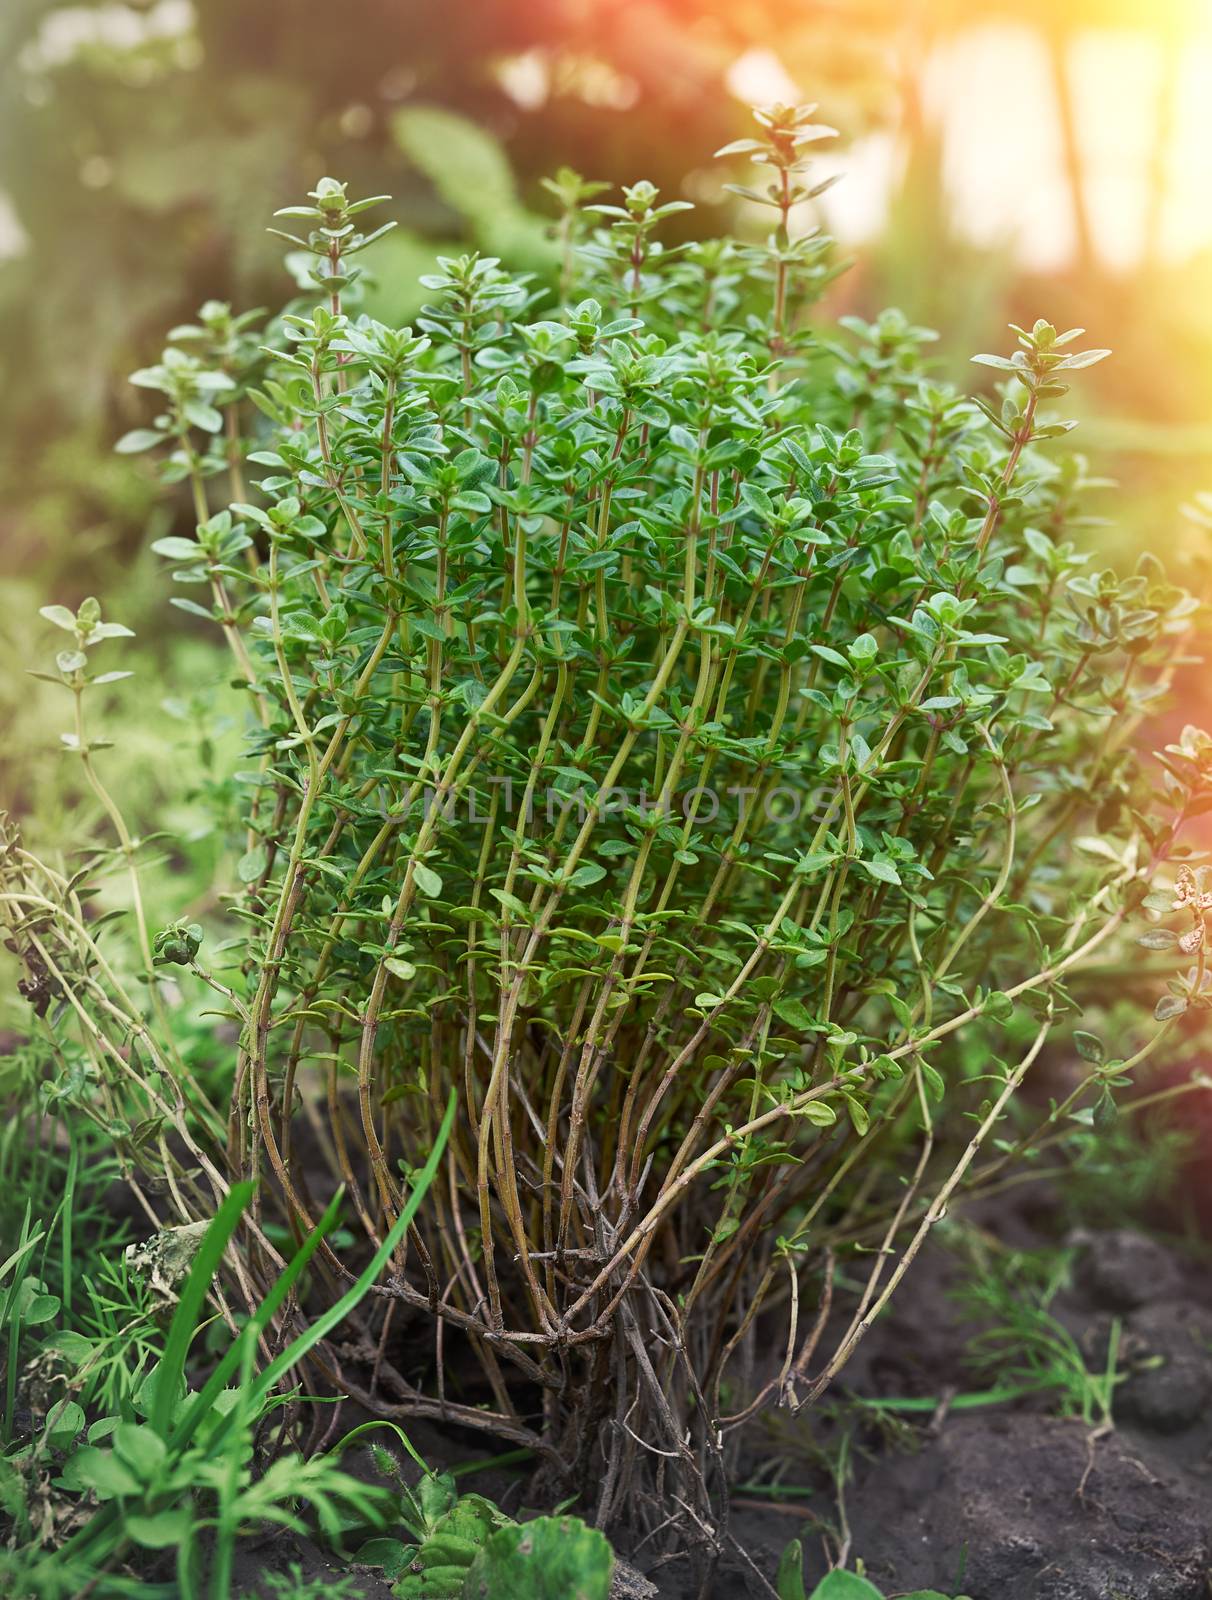 bush of growing thyme with green leaves in the garden in the sun by ndanko